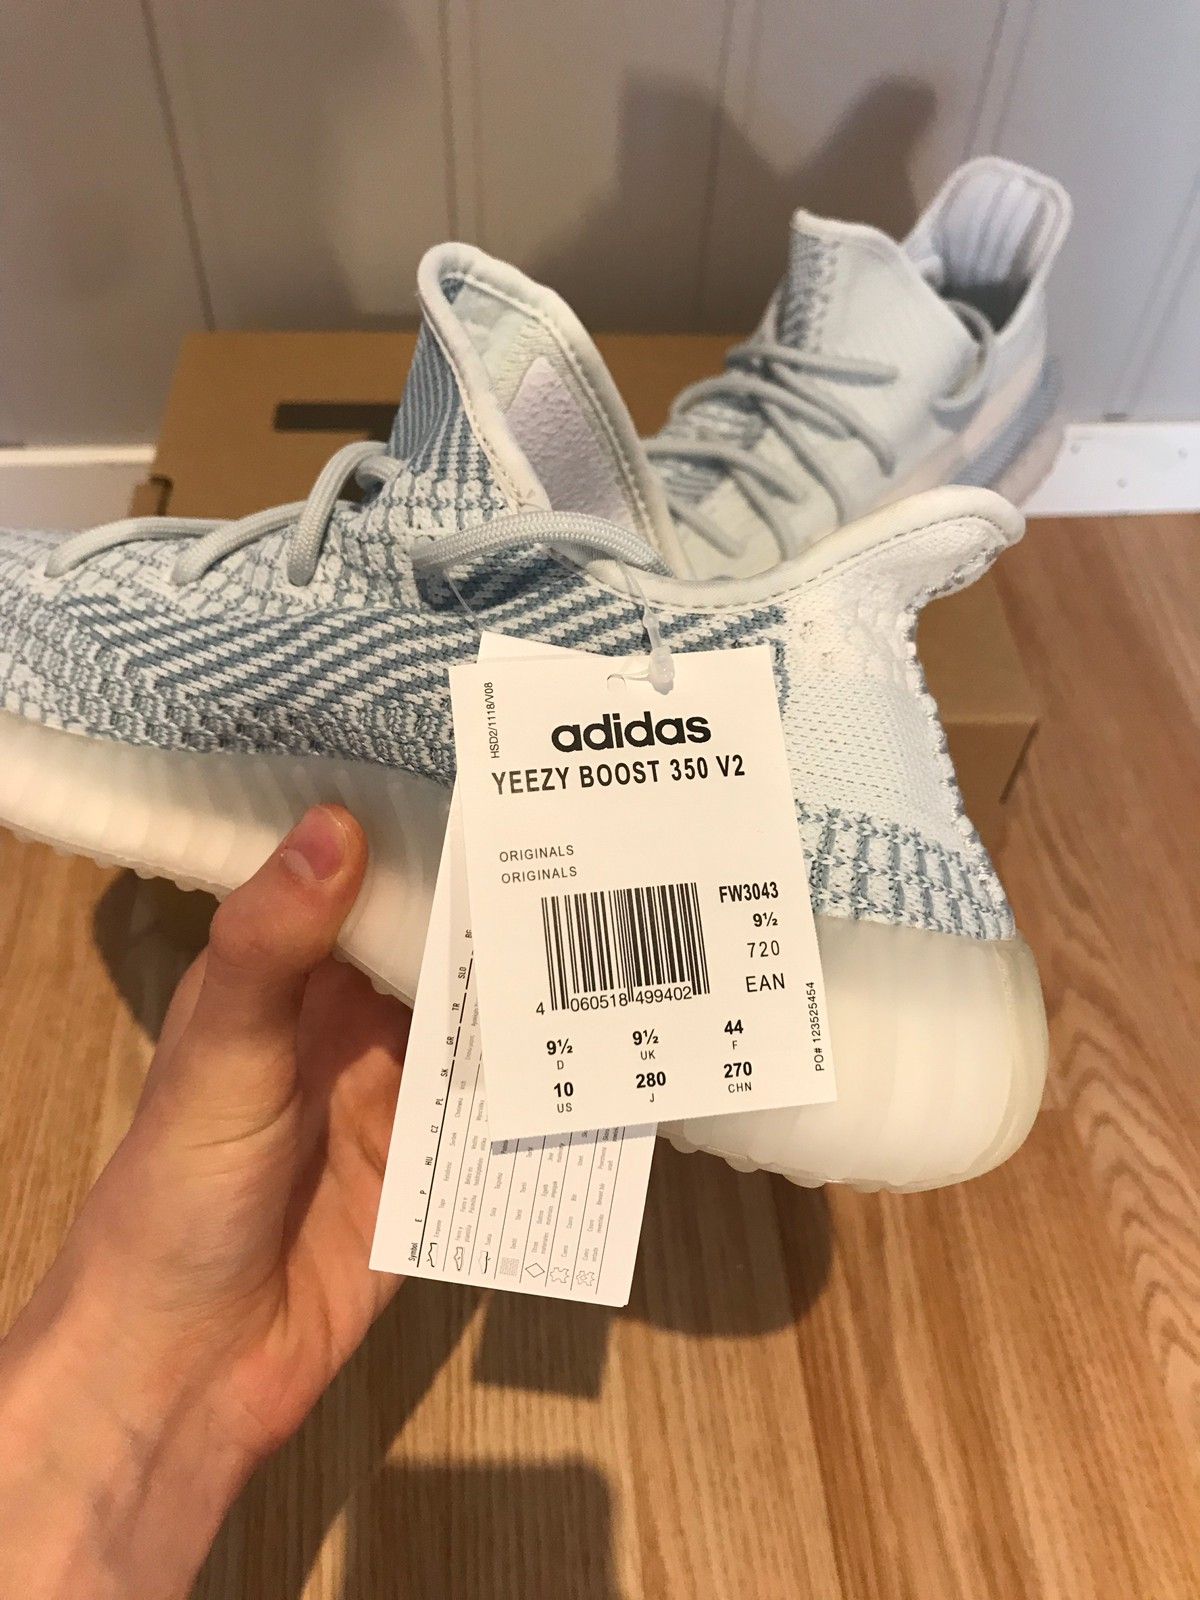 yeezy boost 350 v2 cloud white fw3043